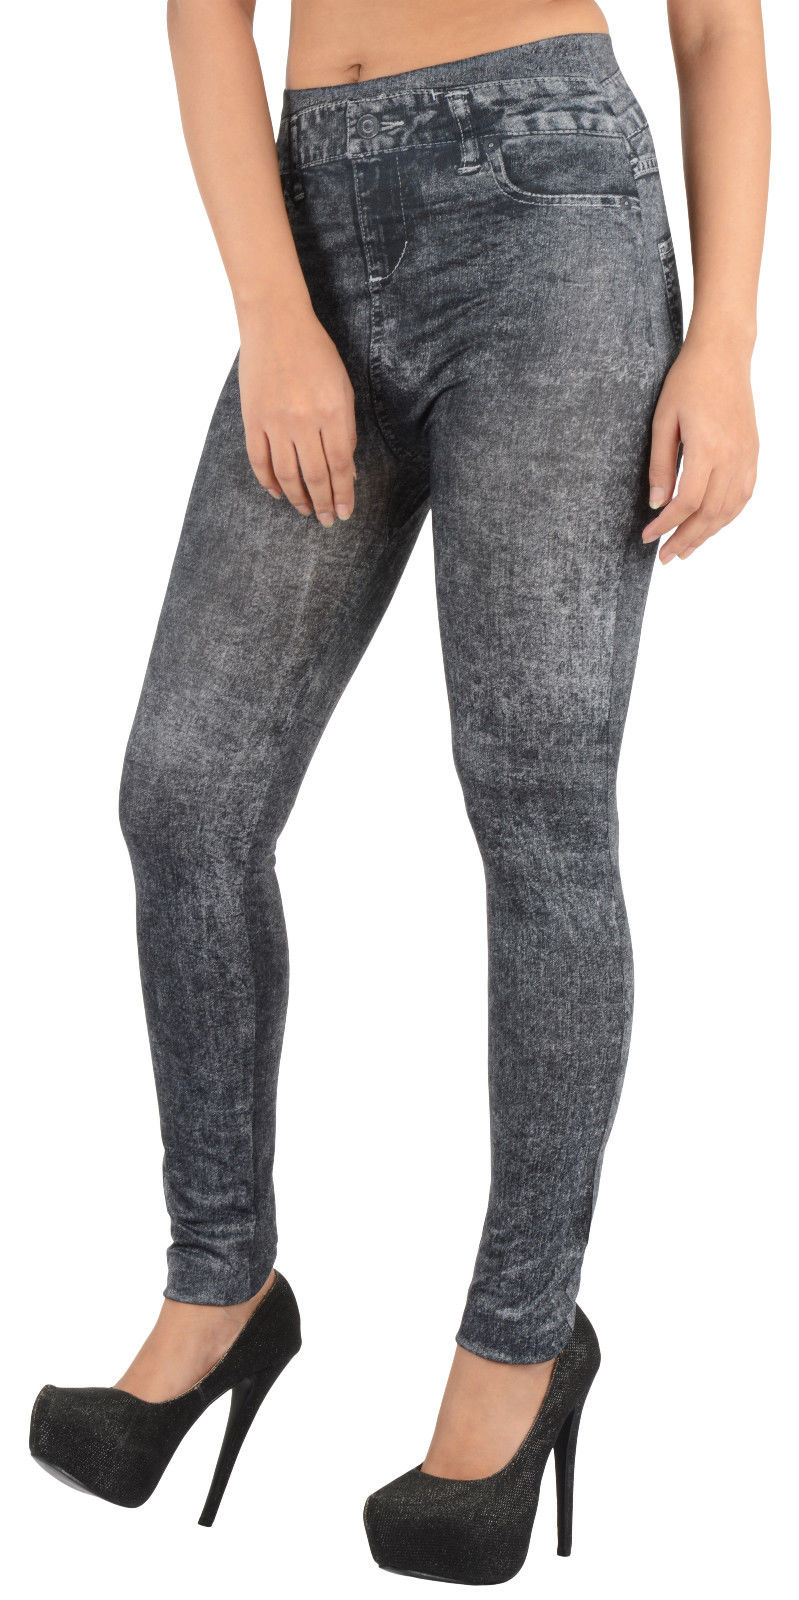 Buy Leggings That Look Like Jeans  International Society of Precision  Agriculture